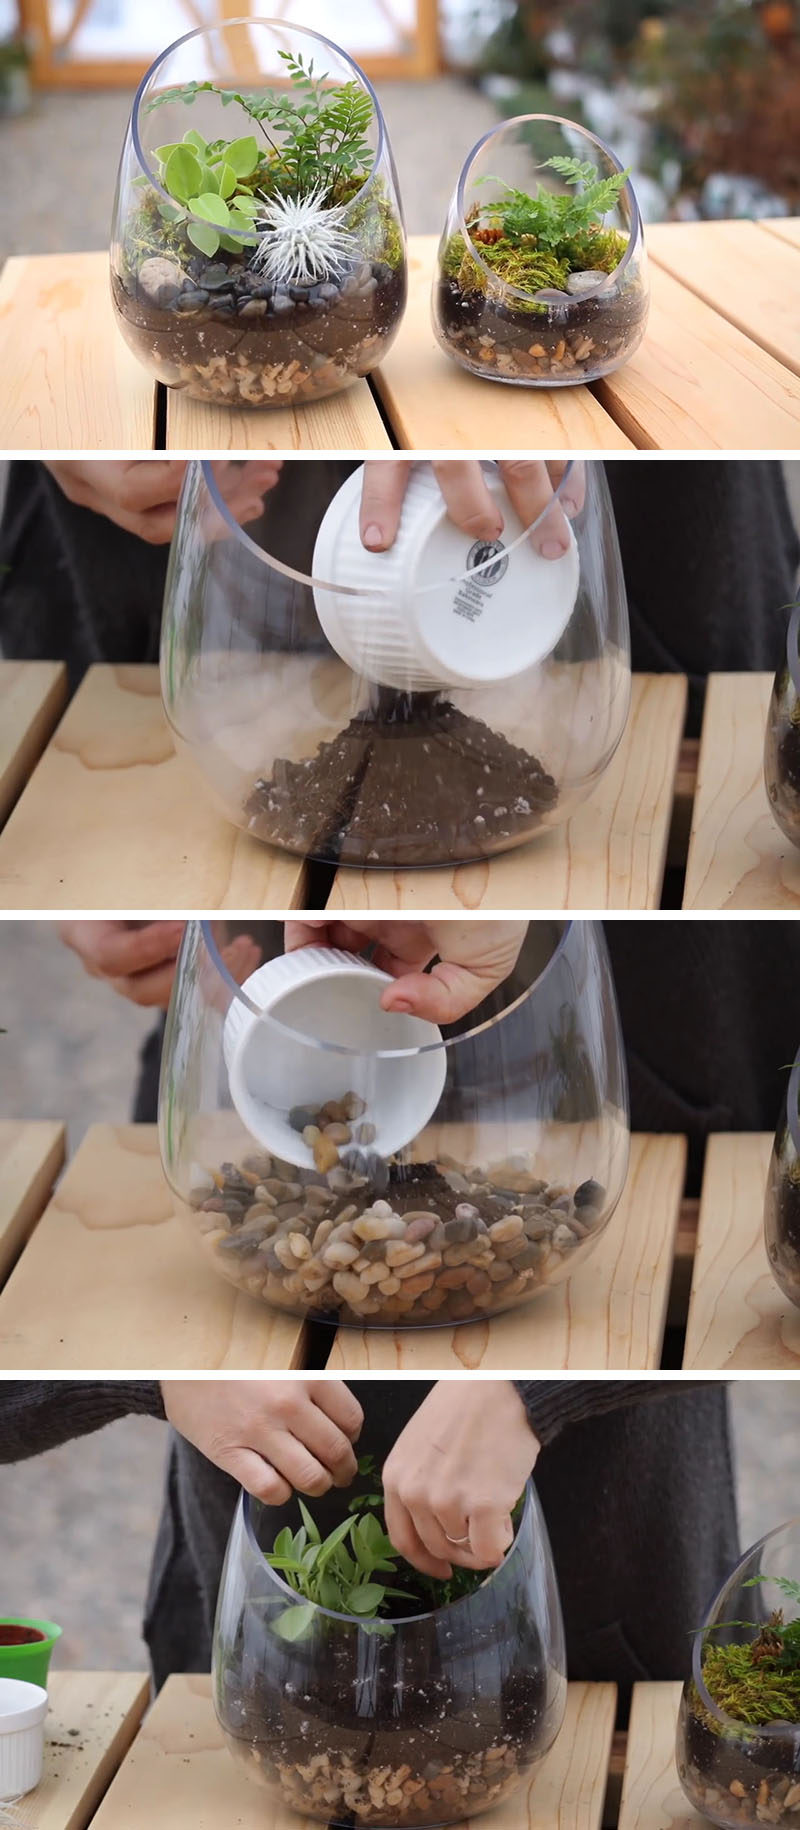 Here's a home decor DIY for making your own modern terrarium using a glass bowl that lets you show off your plants and see the layers of rocks, soil and moss.